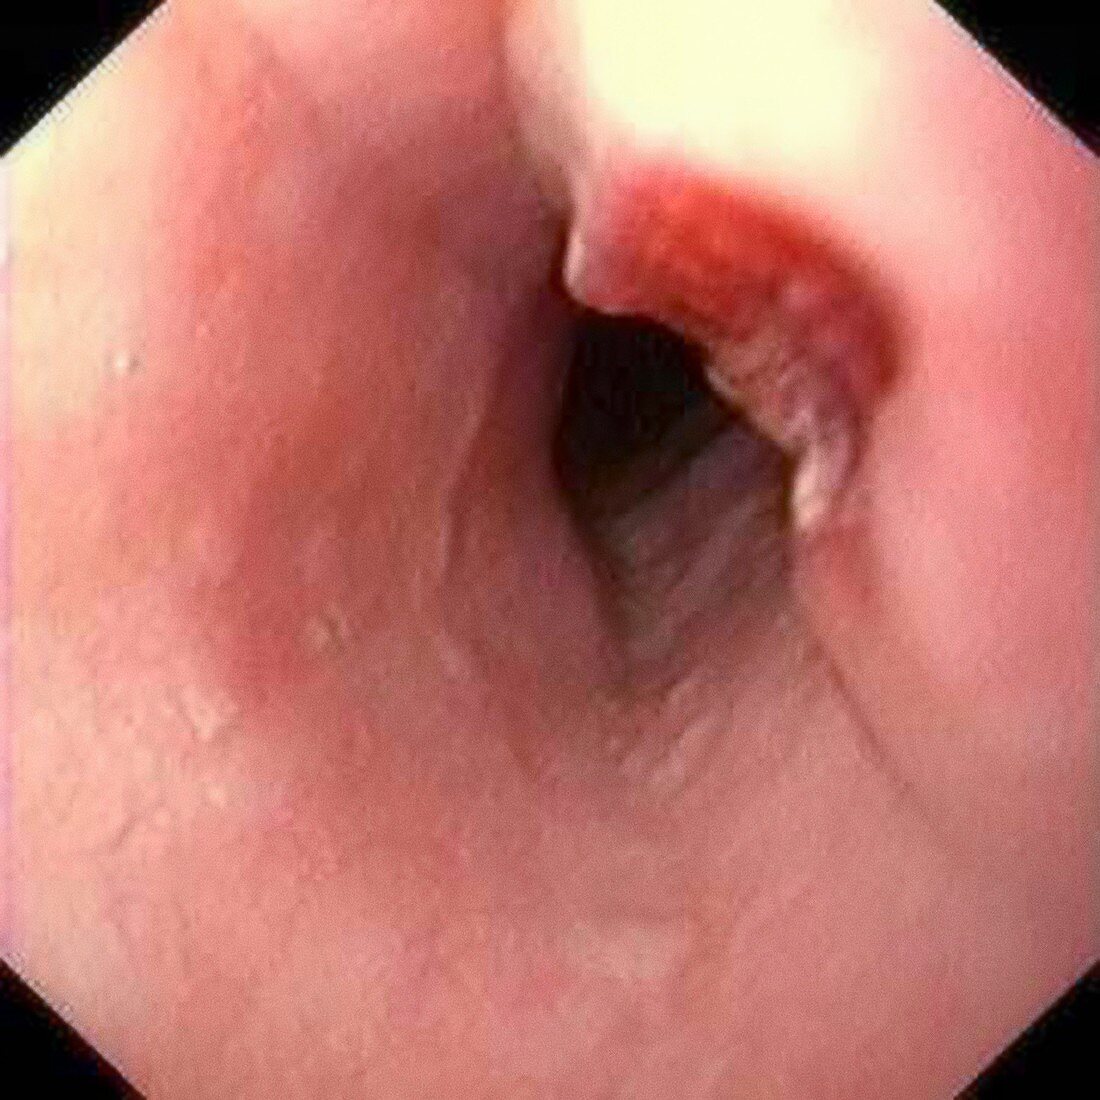 Oesophageal tuberculosis infection,endoscopy image